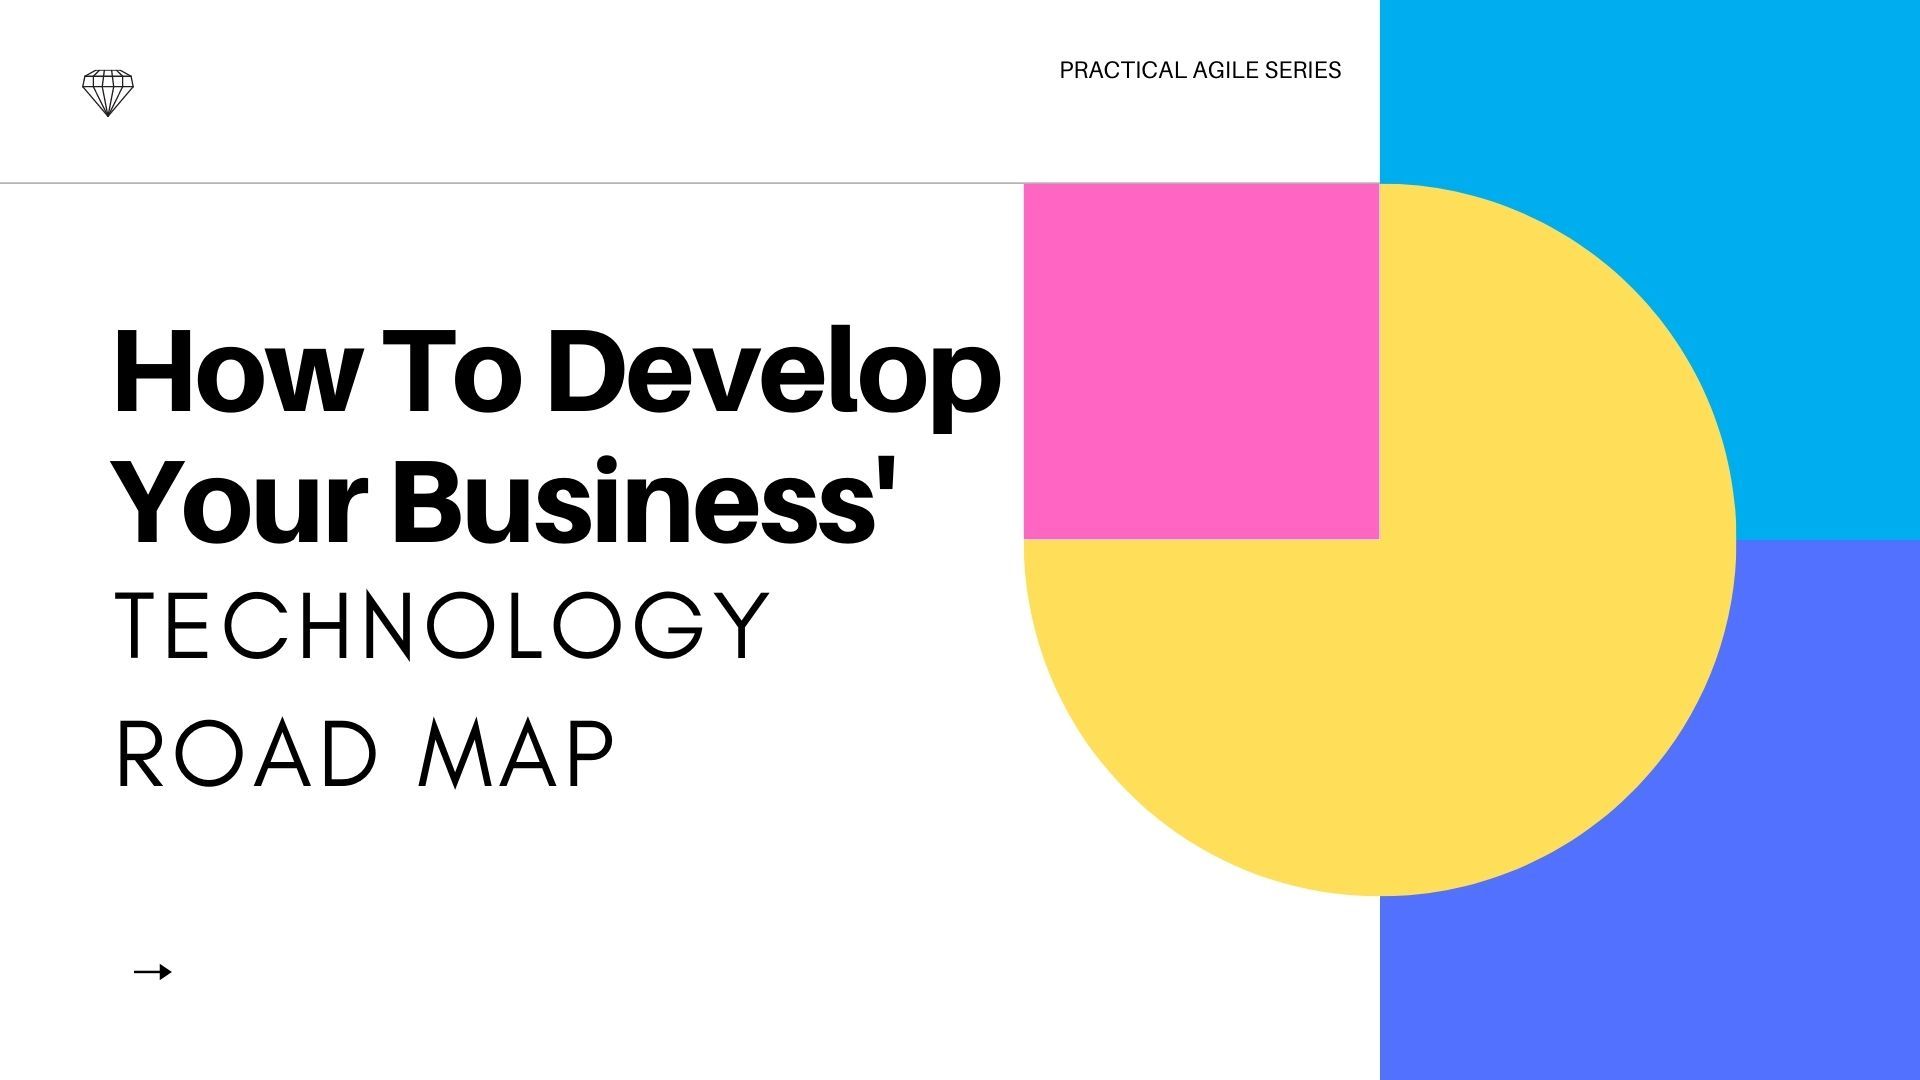 Developing Your Business Technology Roadmap